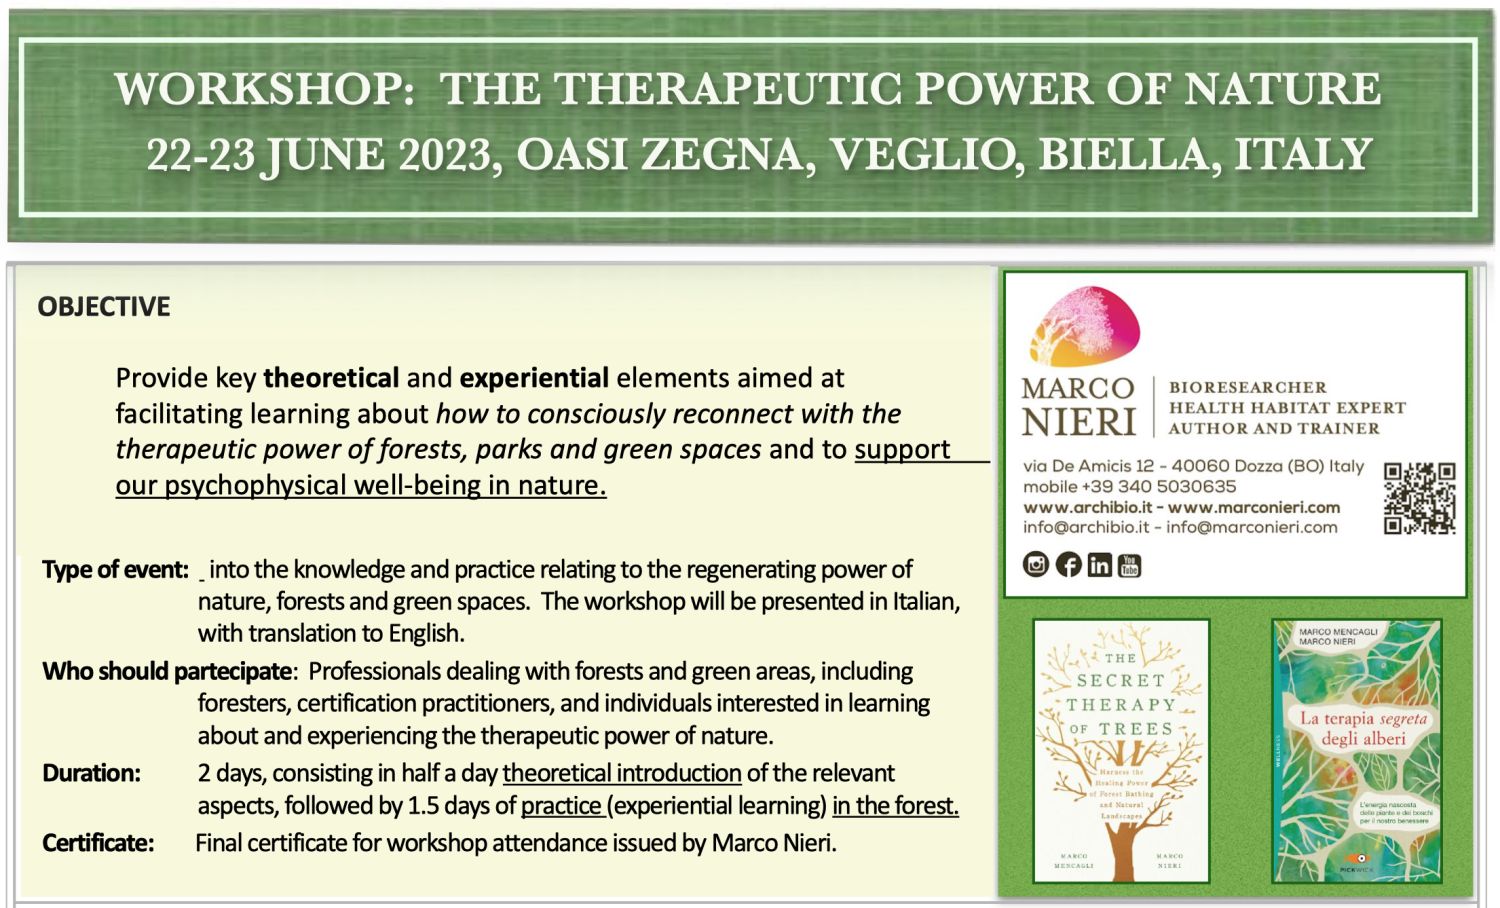 WORKSHOP: THE THERAPEUTIC POWER OF NATURE